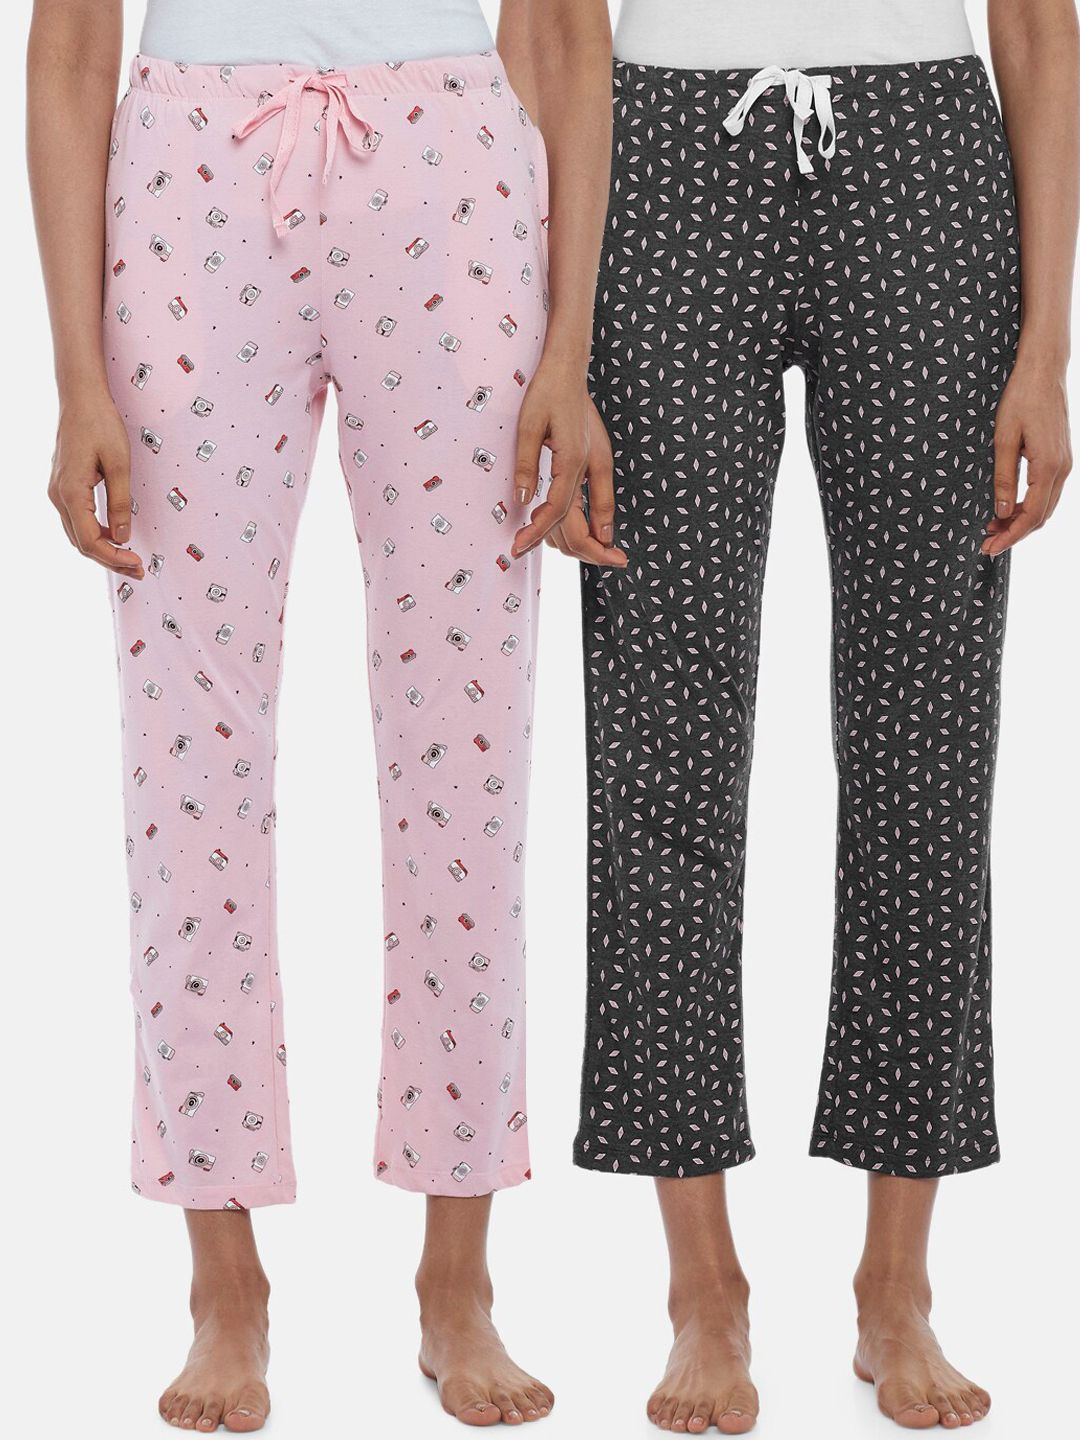 Dreamz by Pantaloons Set Of 2 Women Printed Cotton Lounge Pants Price in India